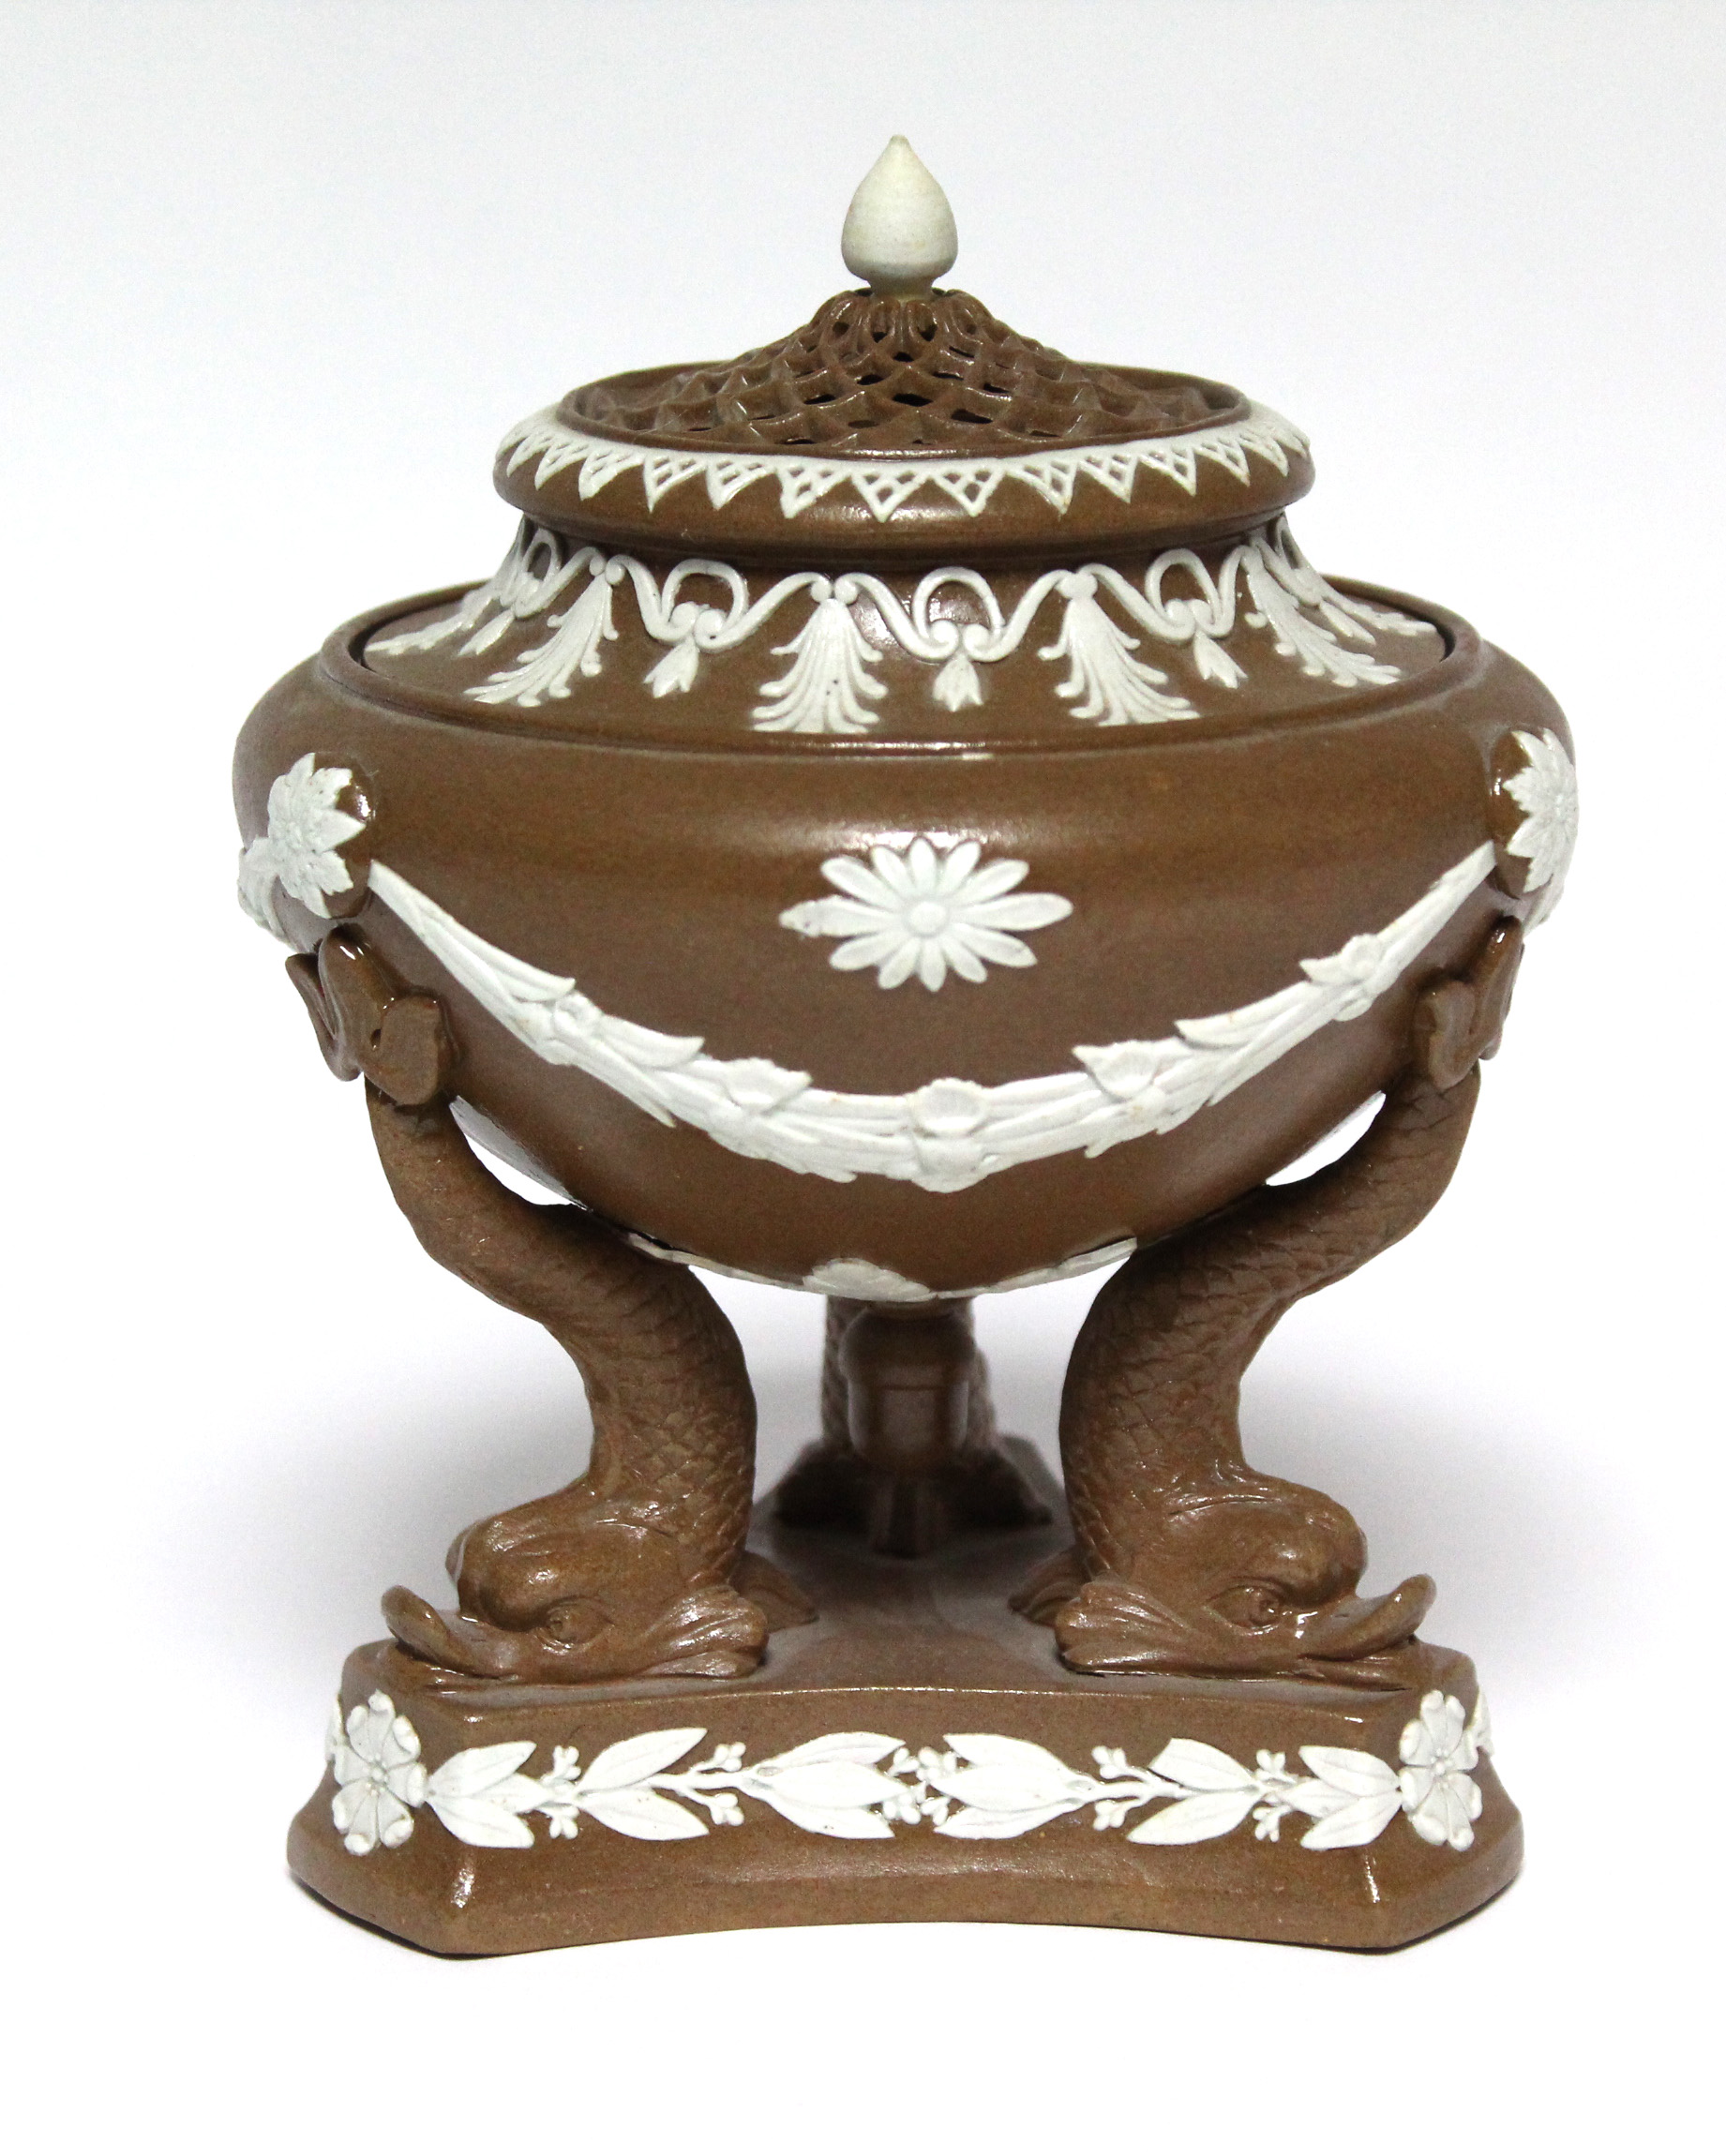 A buff-ground pot pourri vase of classical urn design with applied white swags & anthemions, pierced